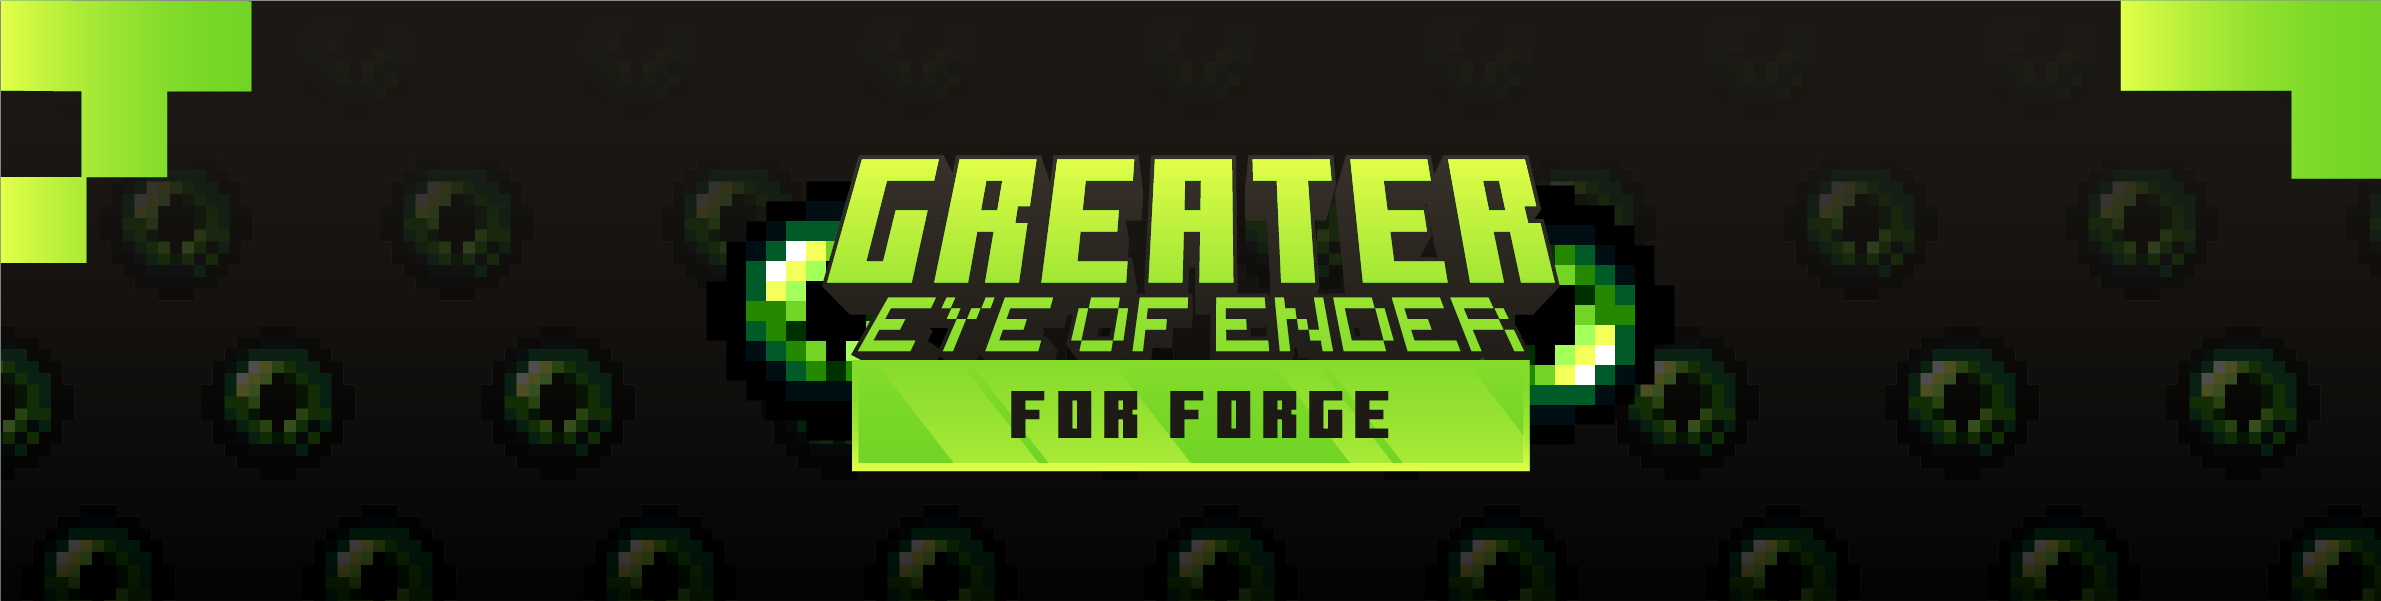 Easier Crafted Eye of Ender Minecraft Data Pack